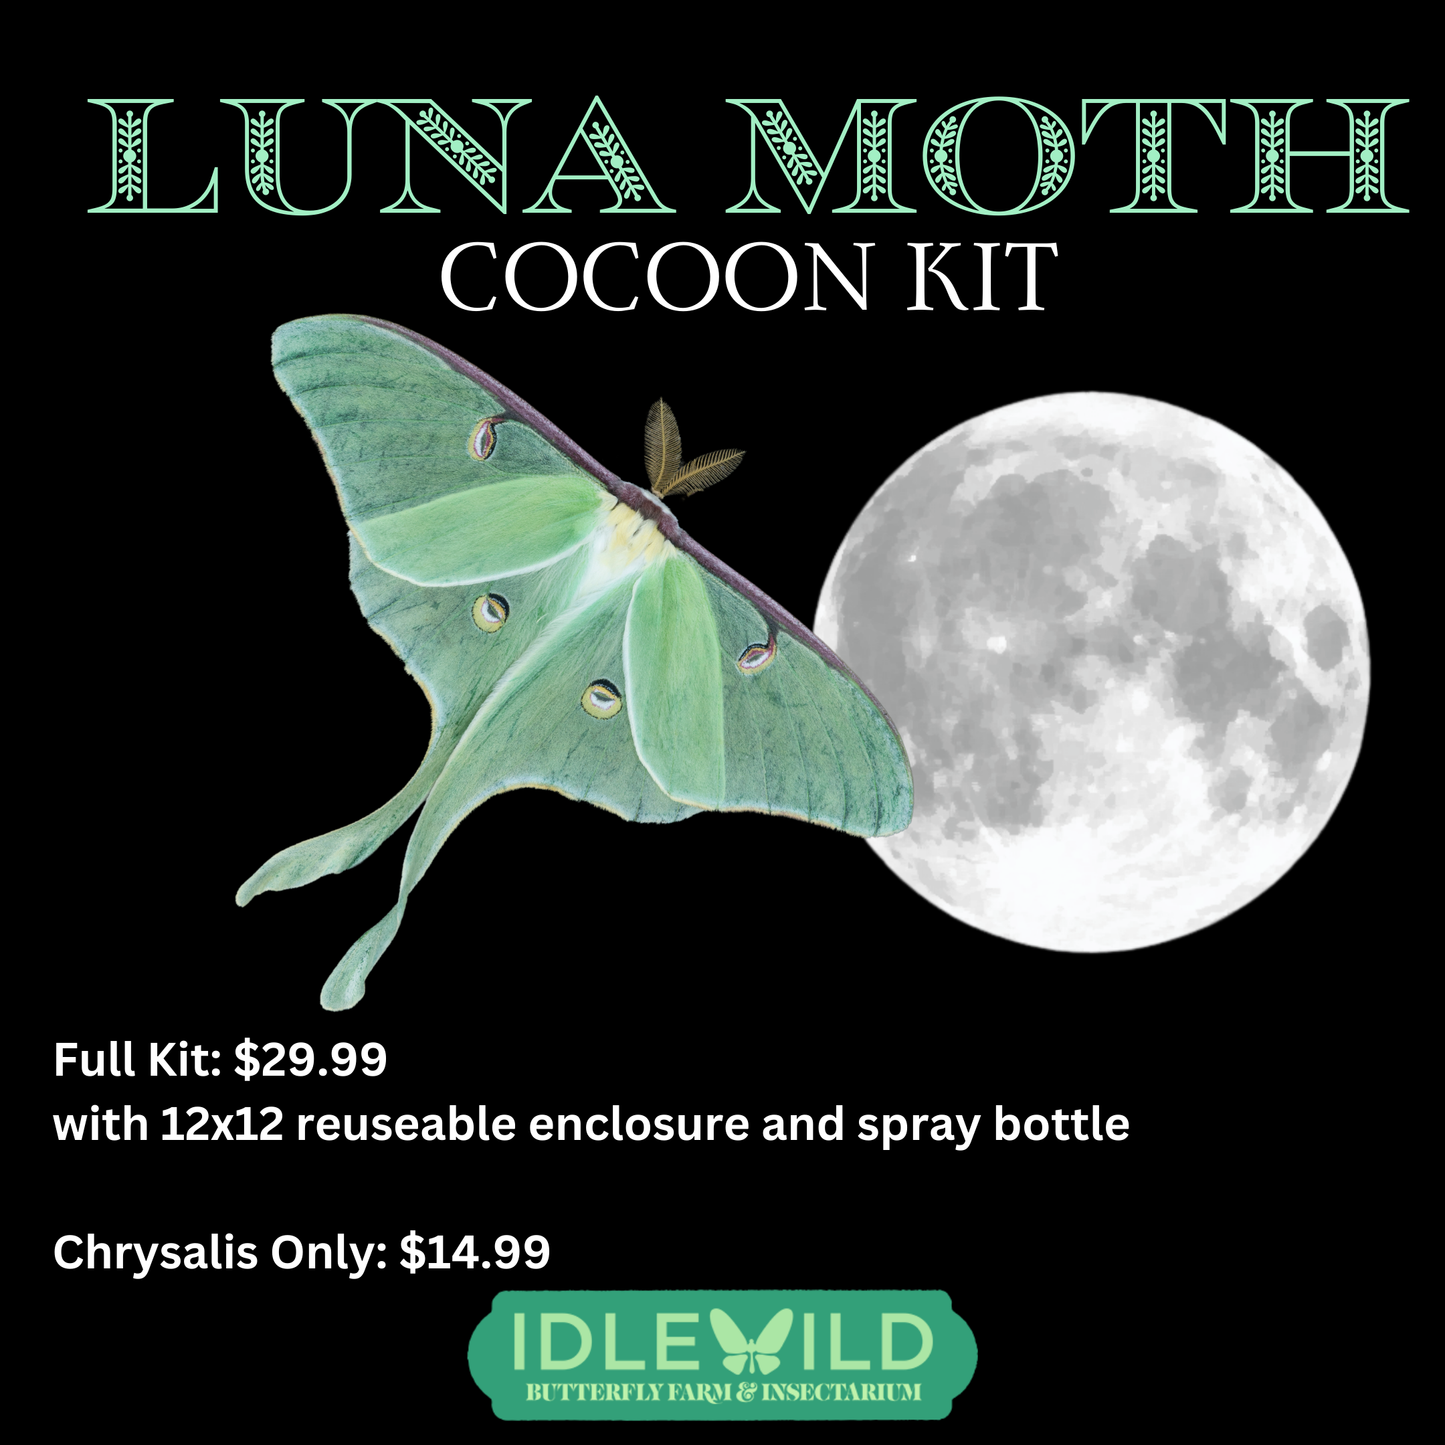 For Pickup Saturday July 6 12pm-4pm, Luna Moth Cocoon Kit